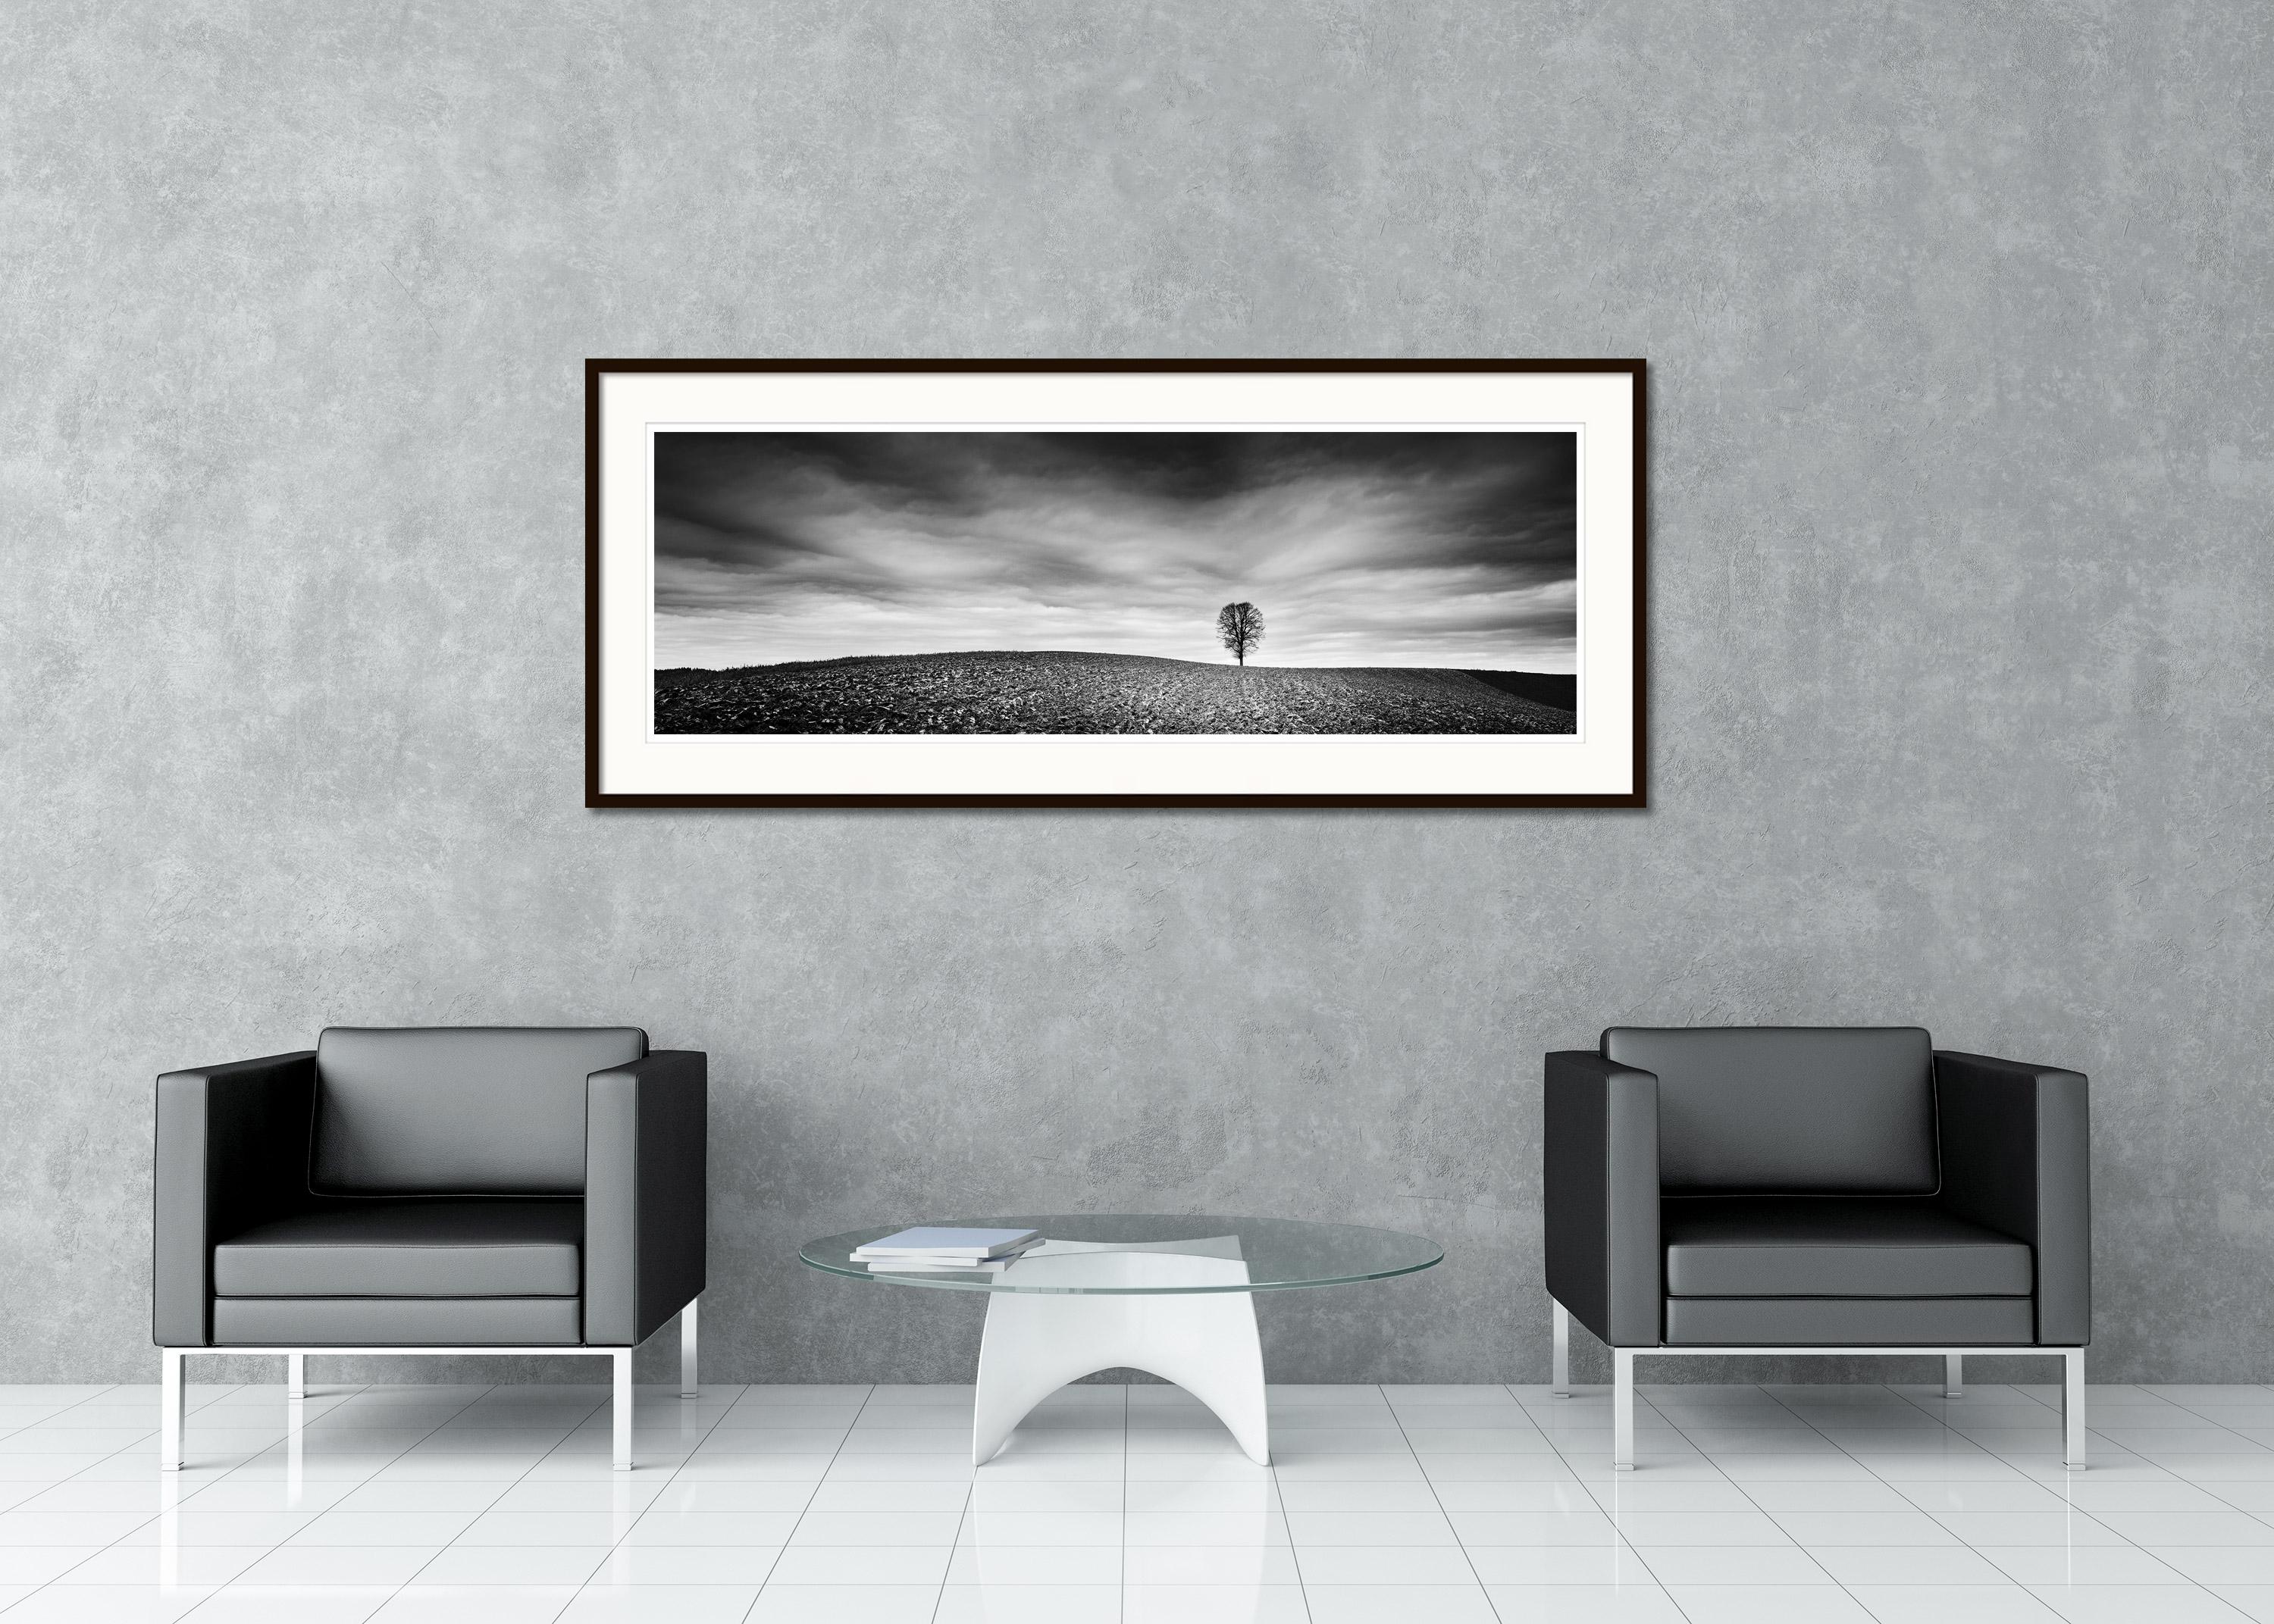 Black and white fine art long exposure landscape photography. Archival pigment ink print as part of a limited edition of 9. All Gerald Berghammer prints are made to order in limited editions on Hahnemuehle Photo Rag Baryta. Each print is stamped on